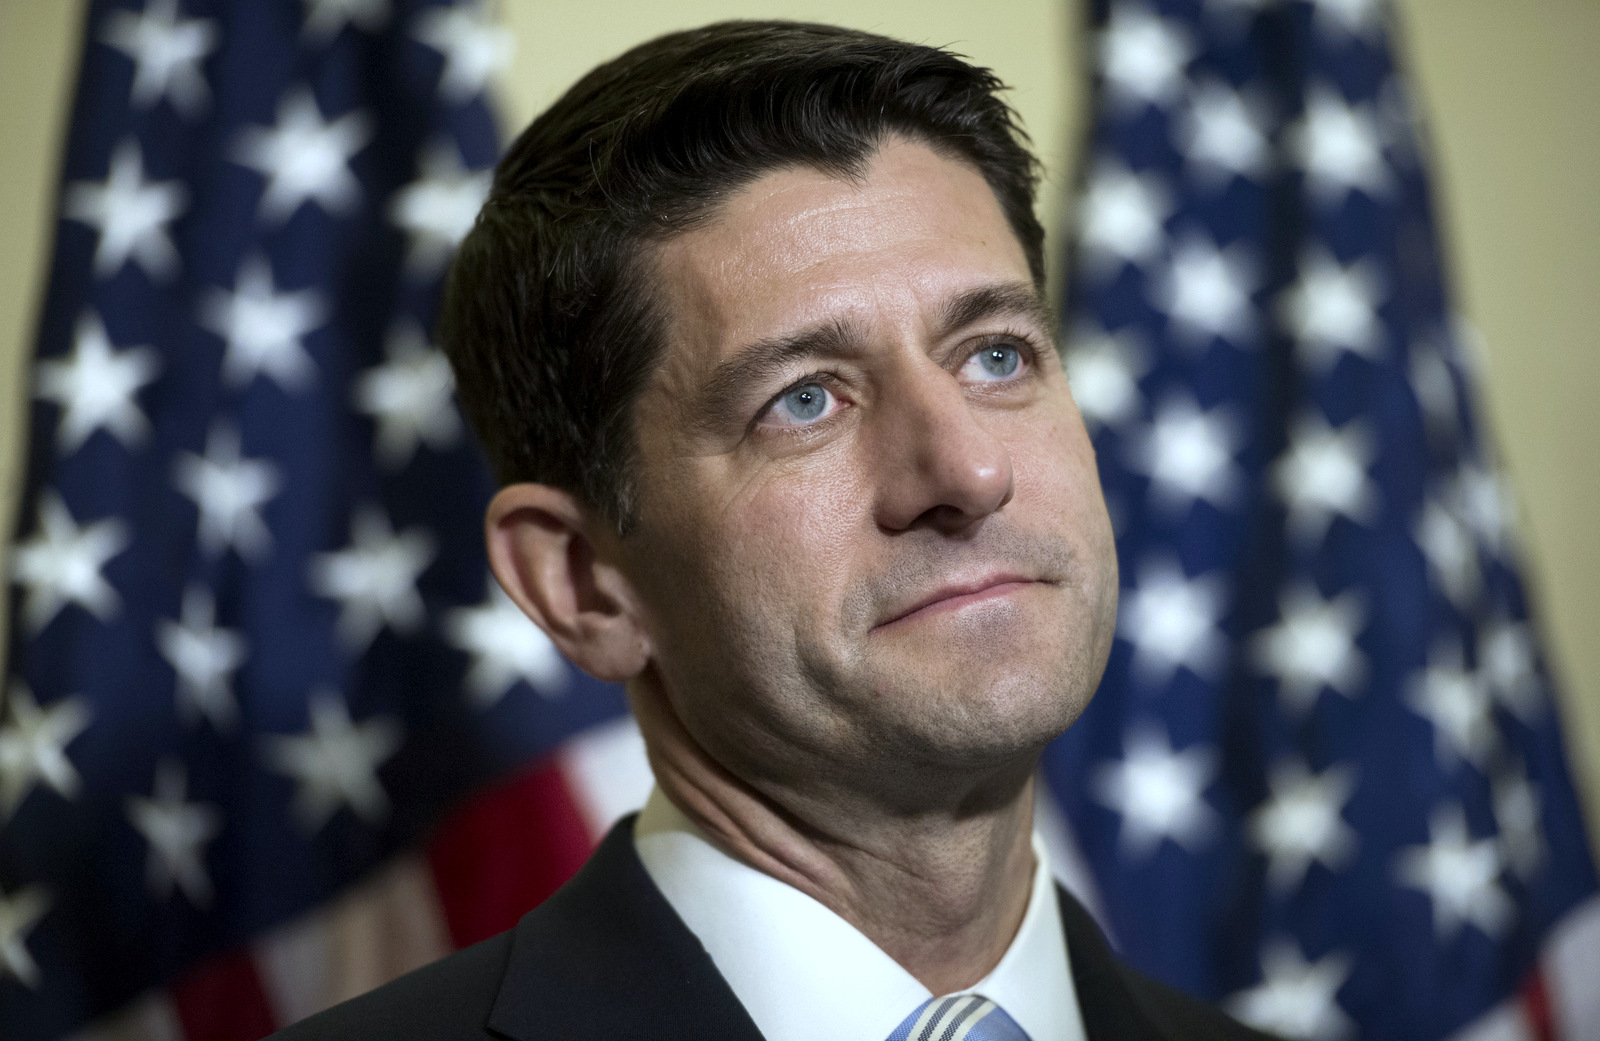 House Speaker Paul Ryan of Wis. speaks during a news conference on Capitol Hill in Washington. (AP/Cliff Owen)